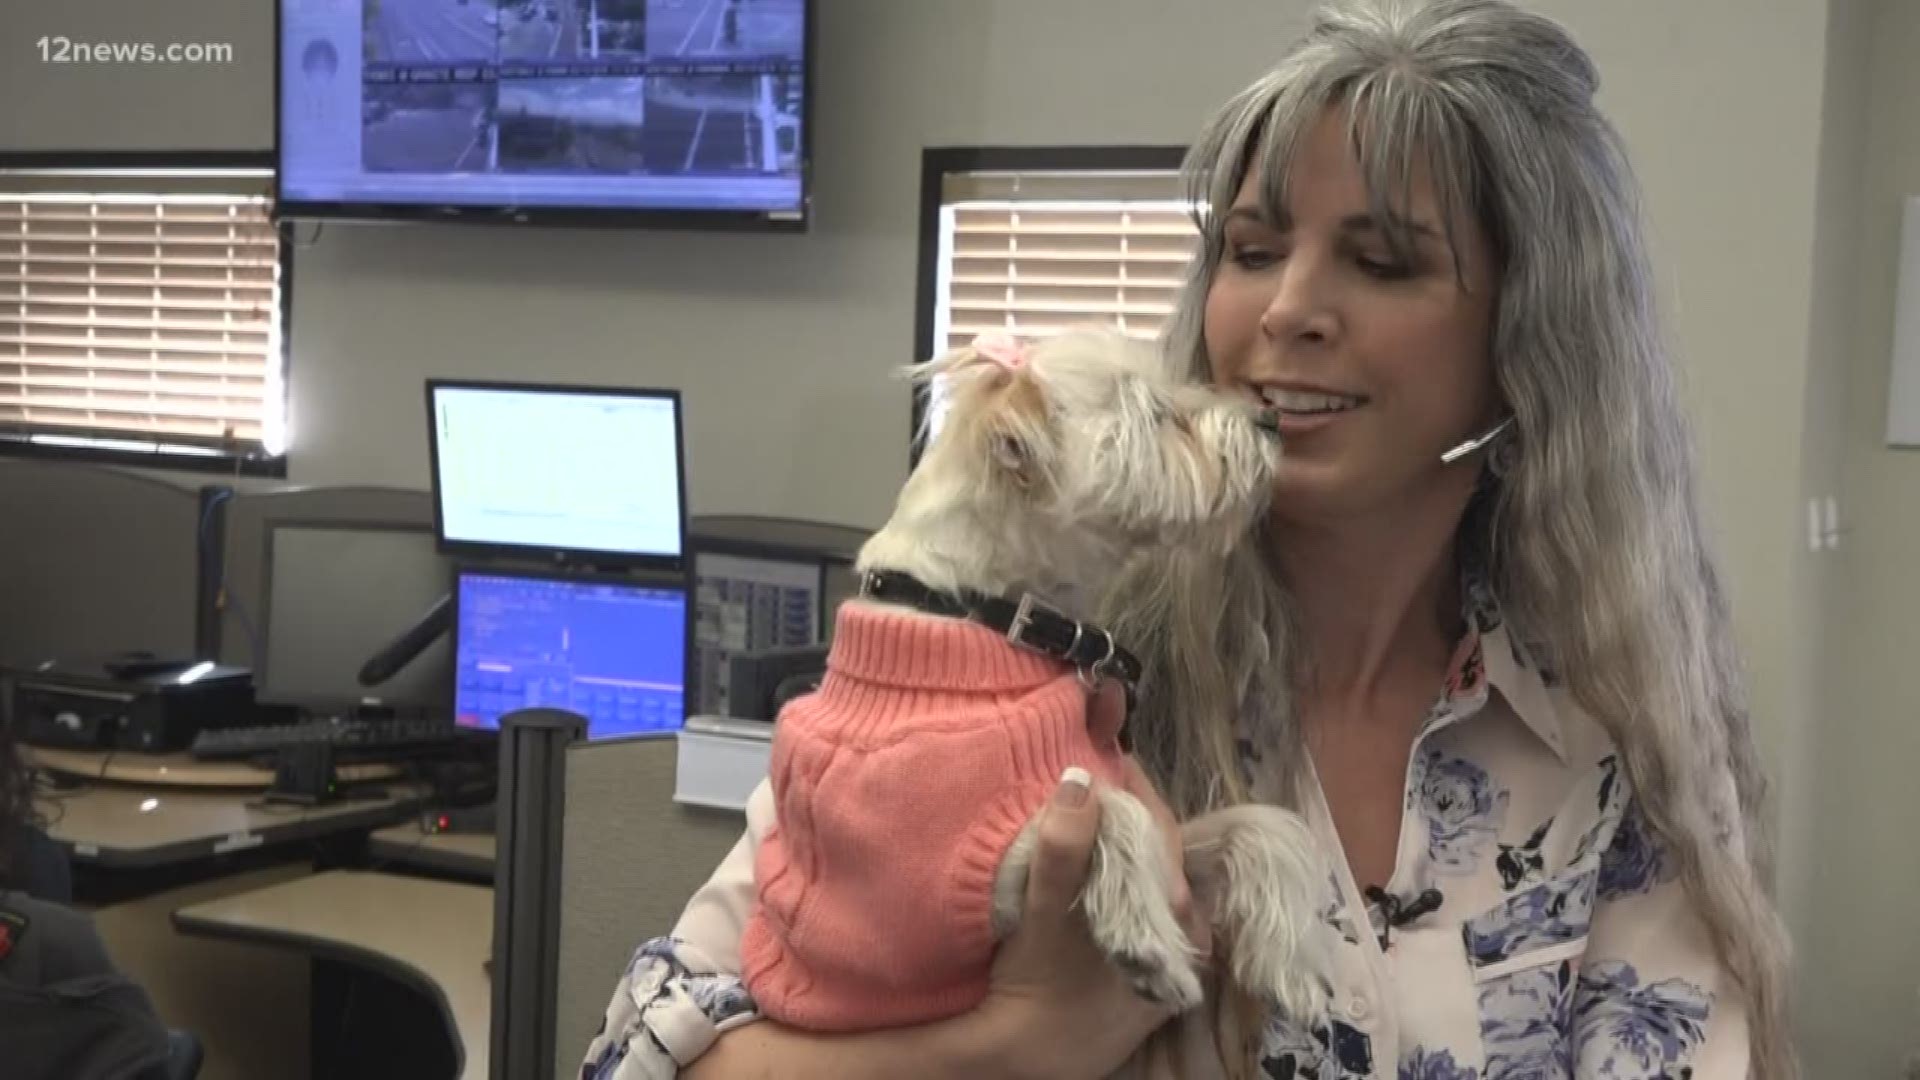 911 dispatchers are often dealing with high-stress situations. At the Scottsdale Emergency Dispatch Center, they found someone to help cope with that stress.